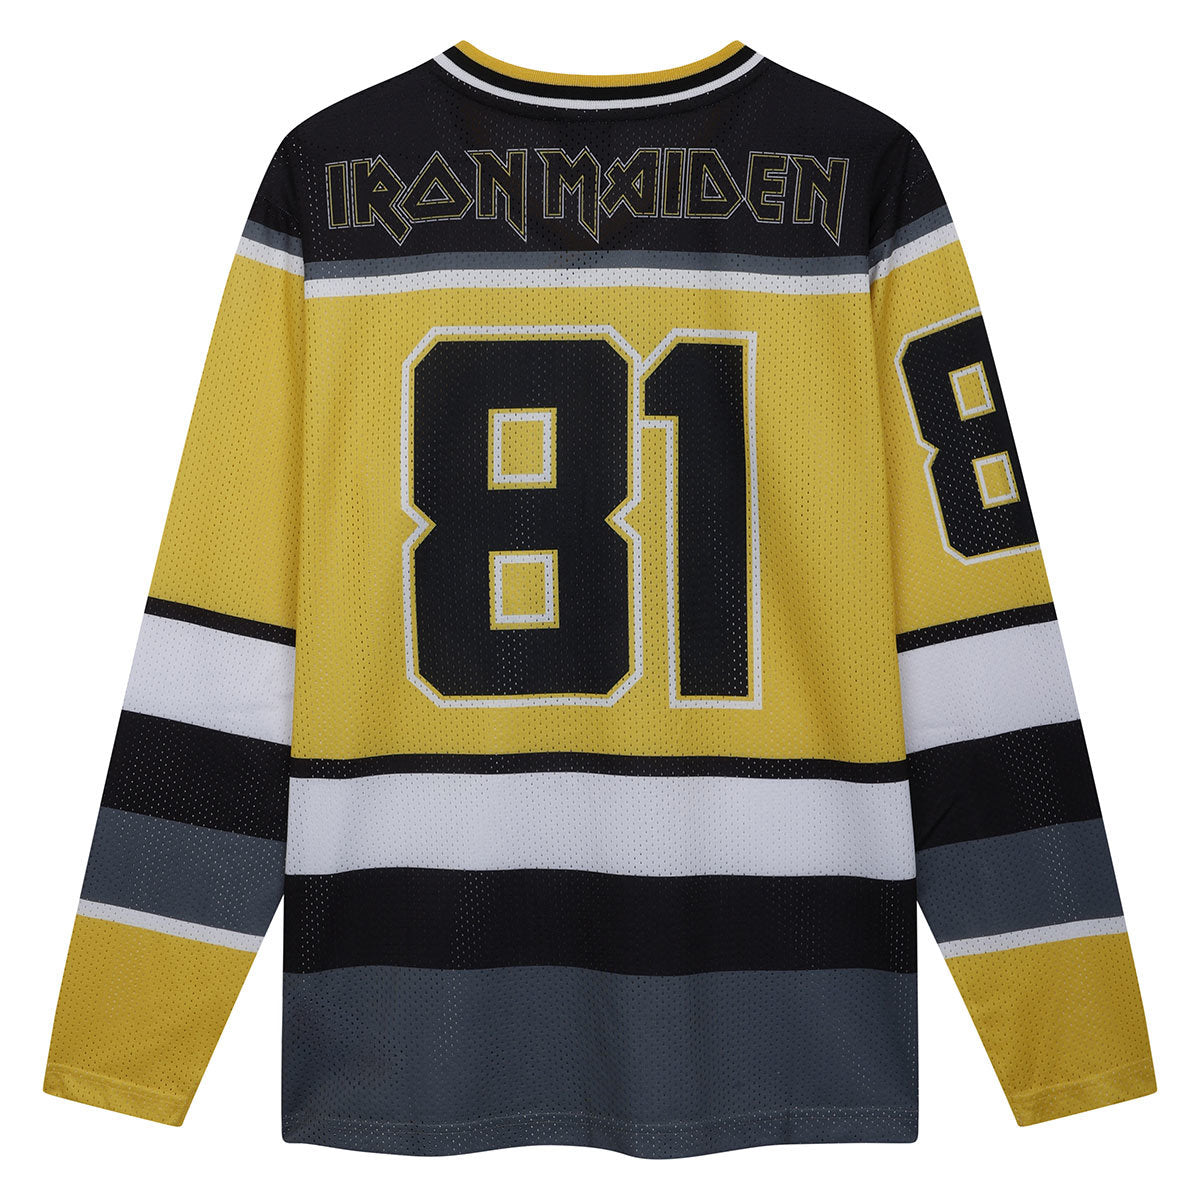 Amplified Iron Maiden Hockey Jersey - Official Licensed Product